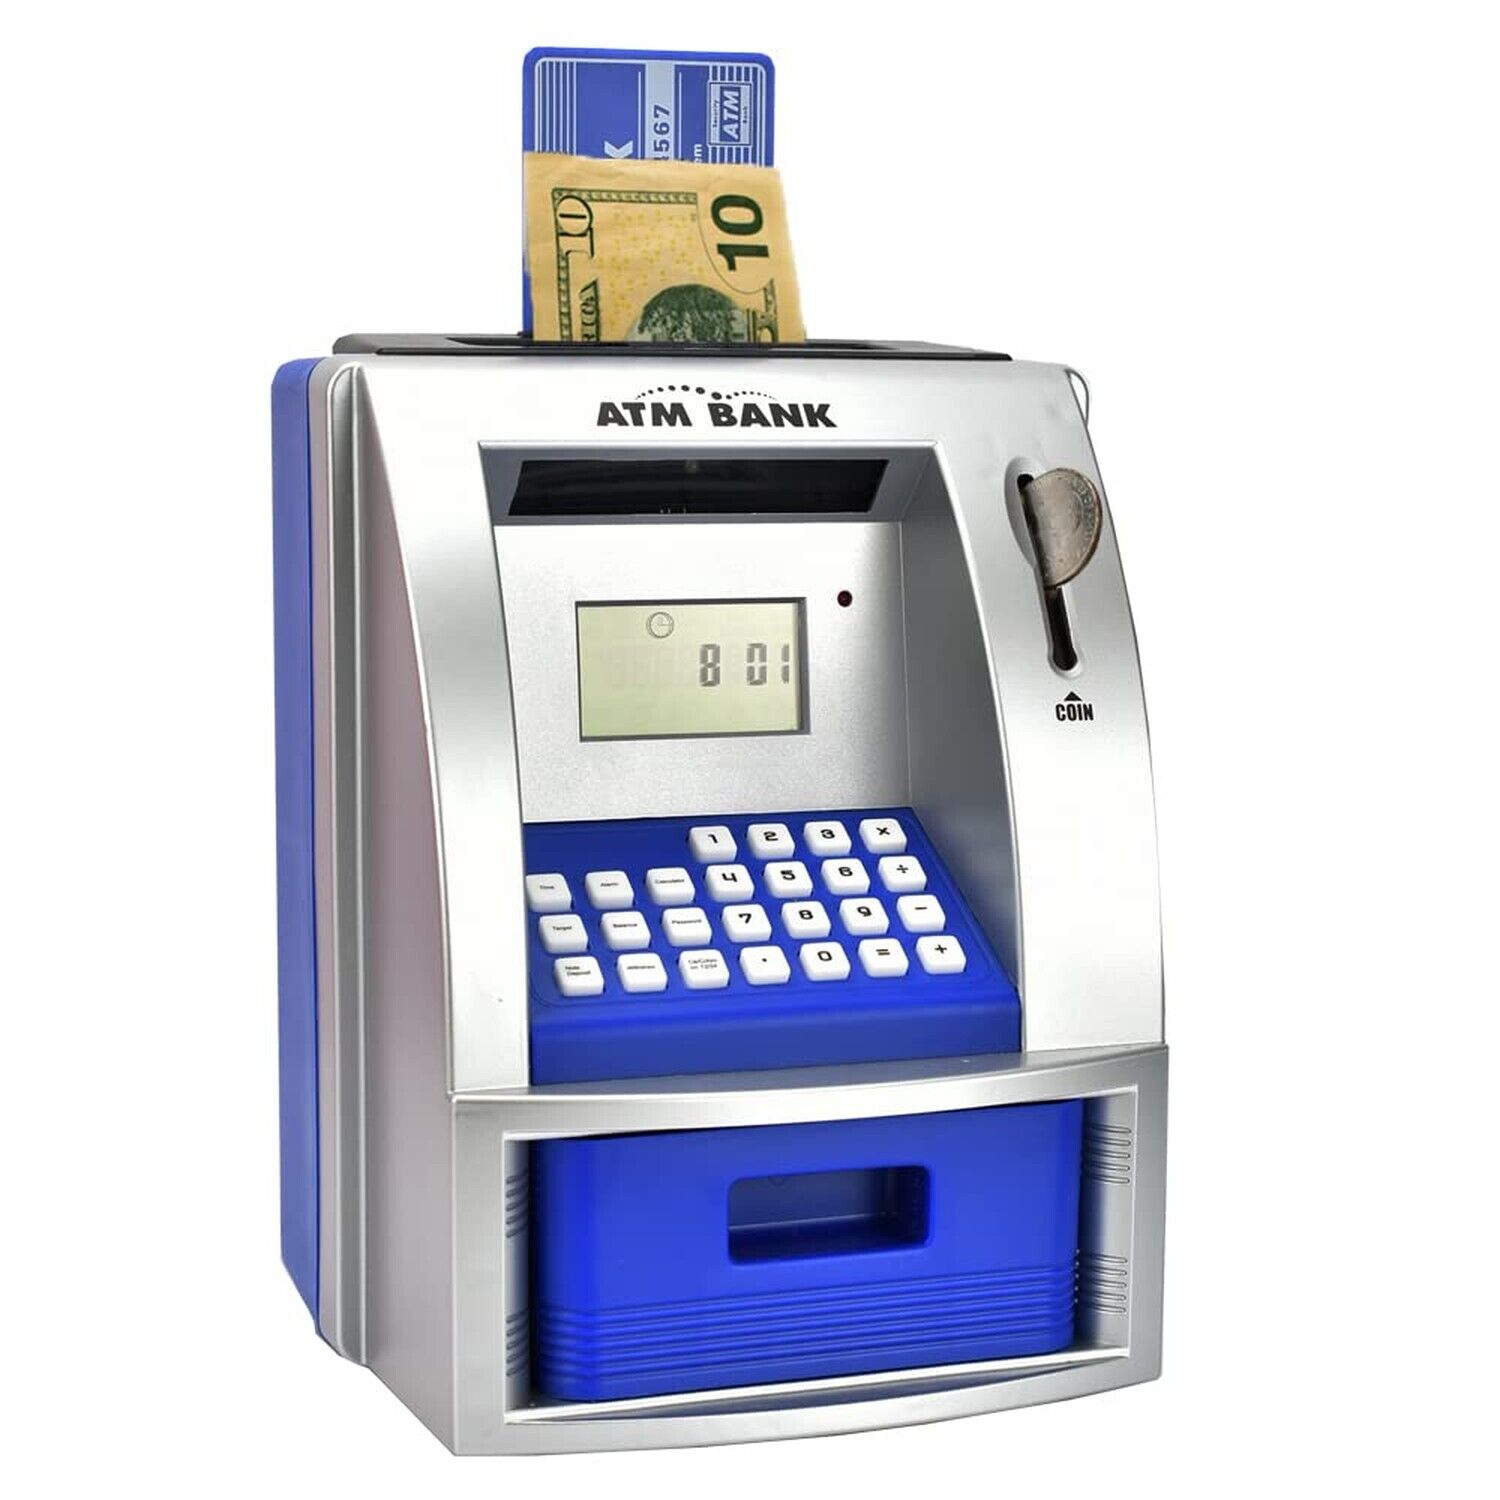 ATM Savings Bank for Real Money, Mini ATM Machine with Debit Card, Electronic...